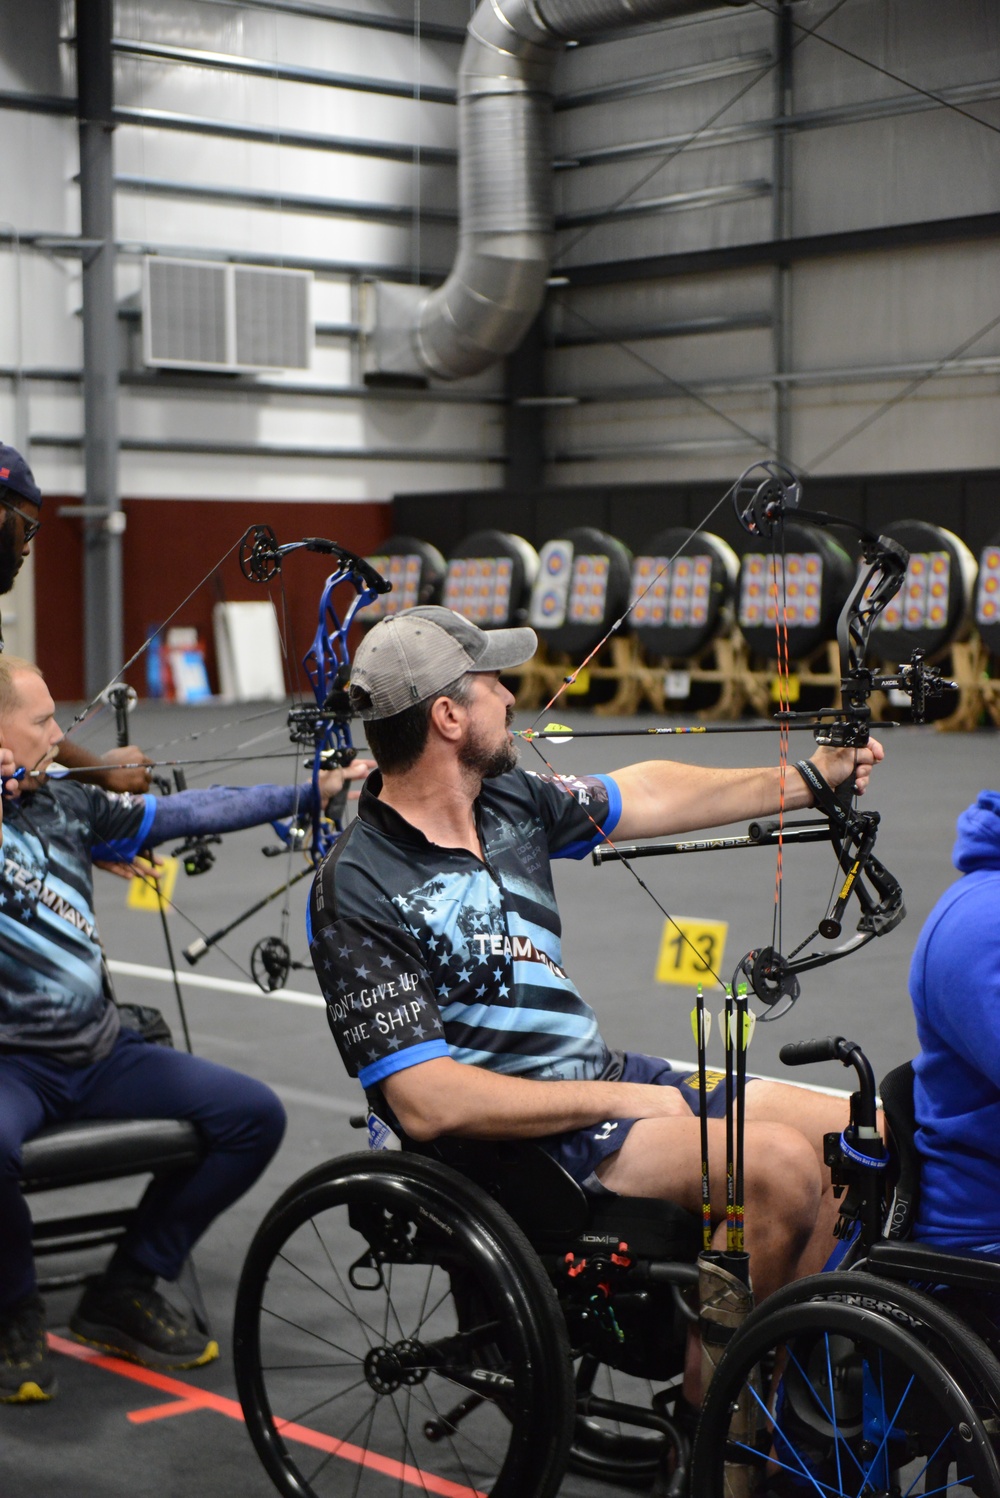 CDR (Ret.) Anthony 'Tony' Jungblut in archery at the 2022 Warrior Games